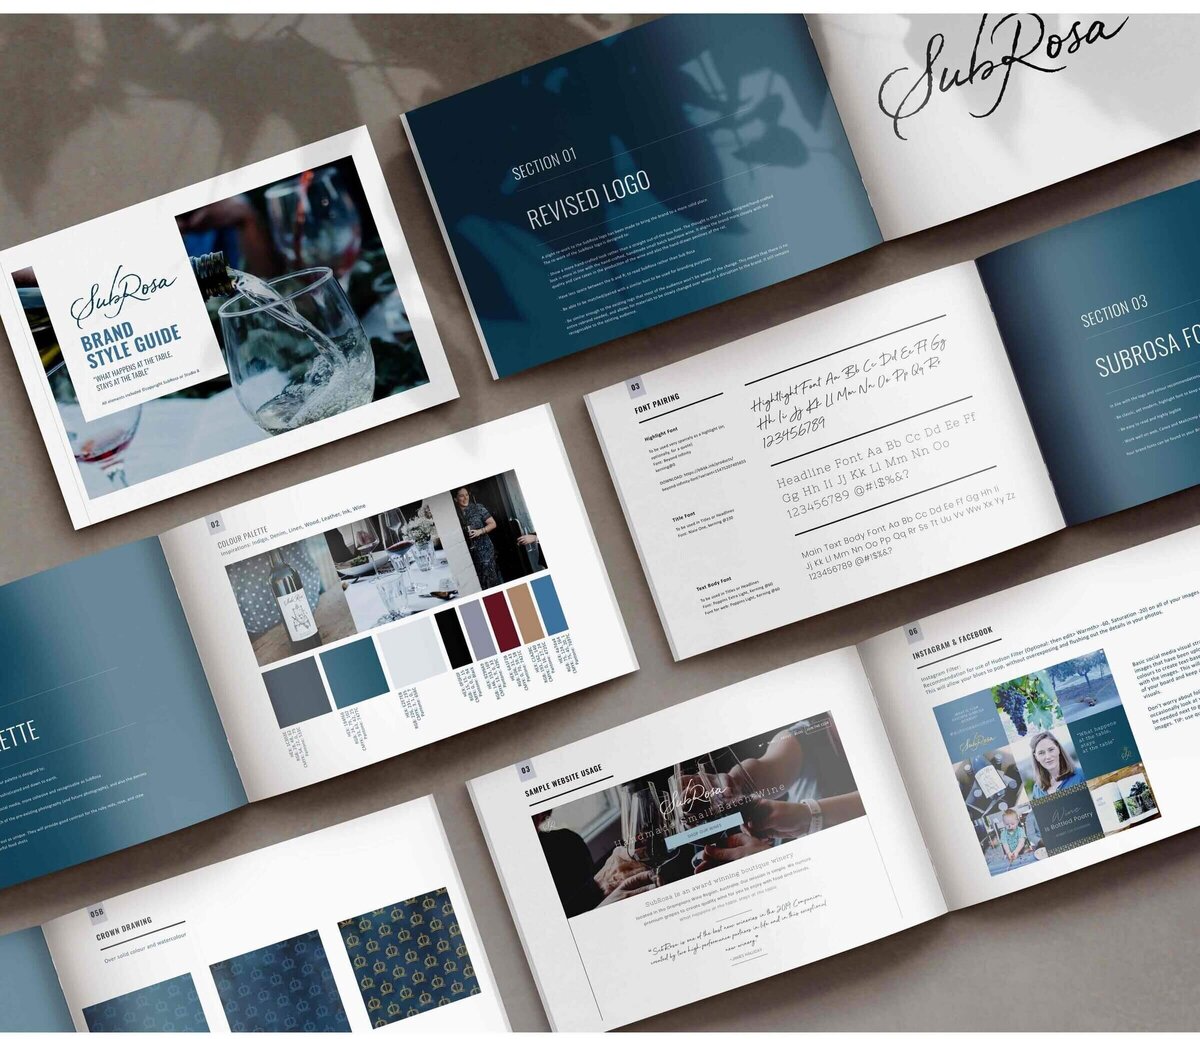 Blue and white brand guidelines for Subrosa Winery